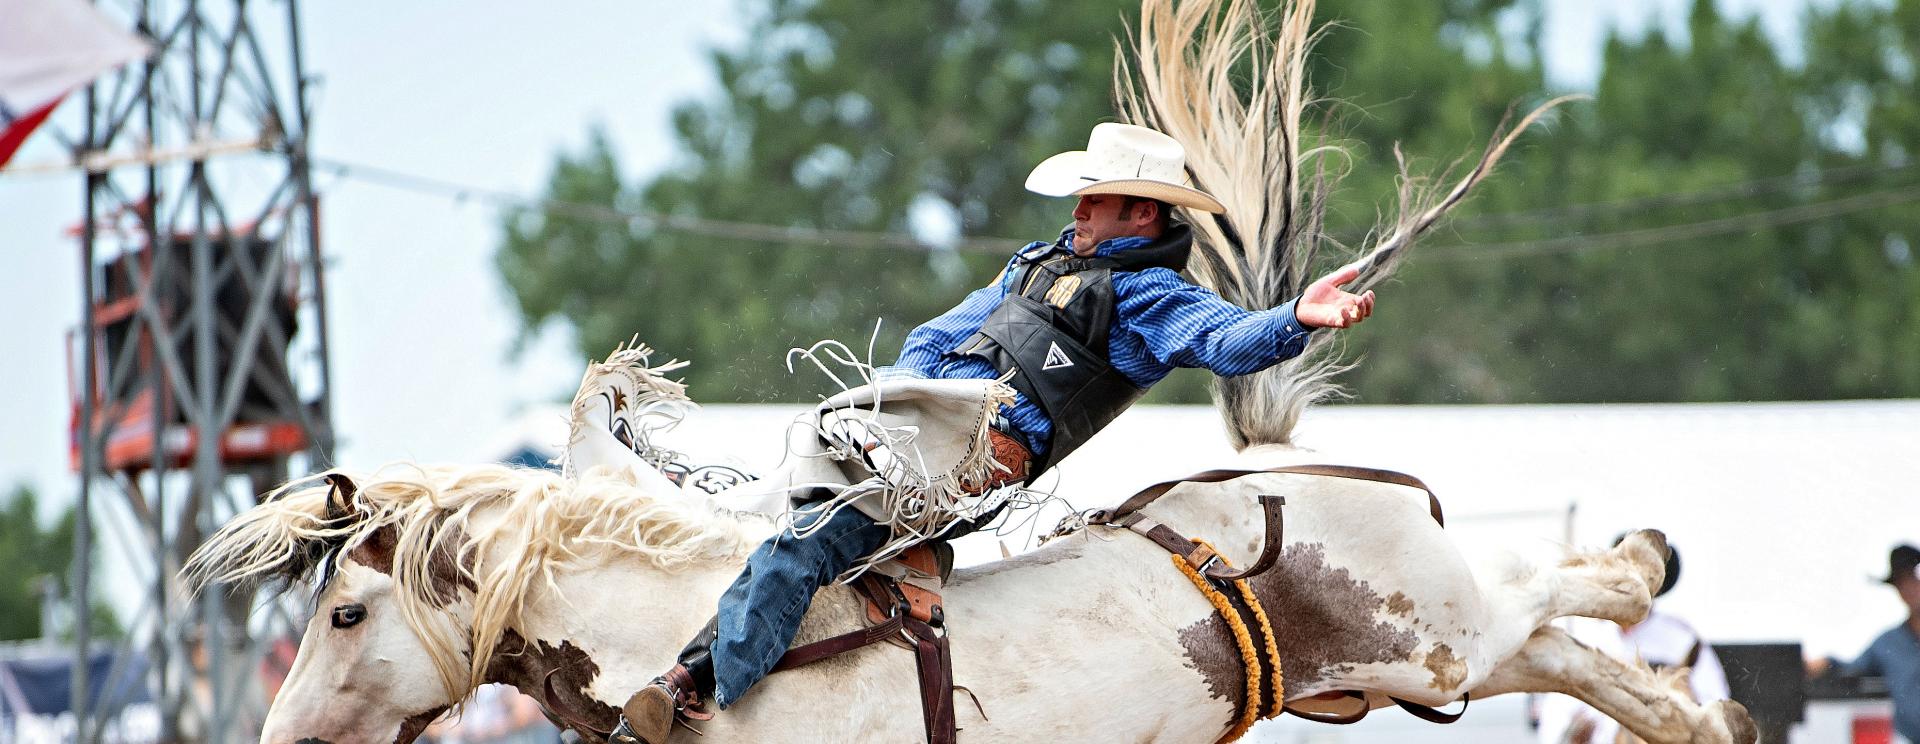 Rider on a bucking horse during the Black Hills Round Up